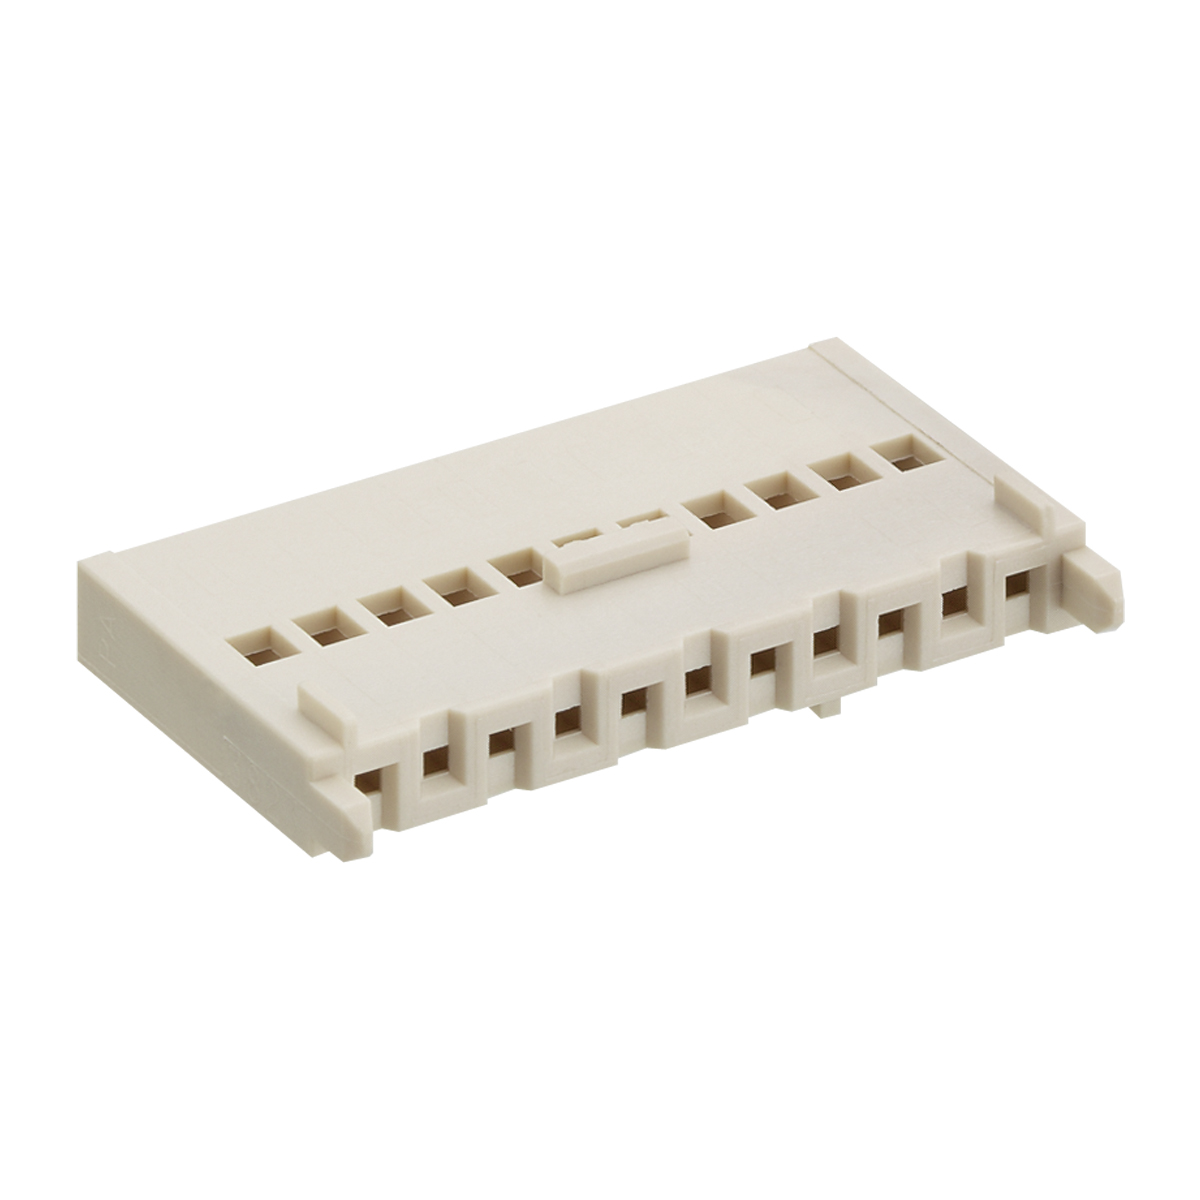 Lumberg: 3823 (Series 38 | Multimodul™ connectors, pitch 2.5 mm)